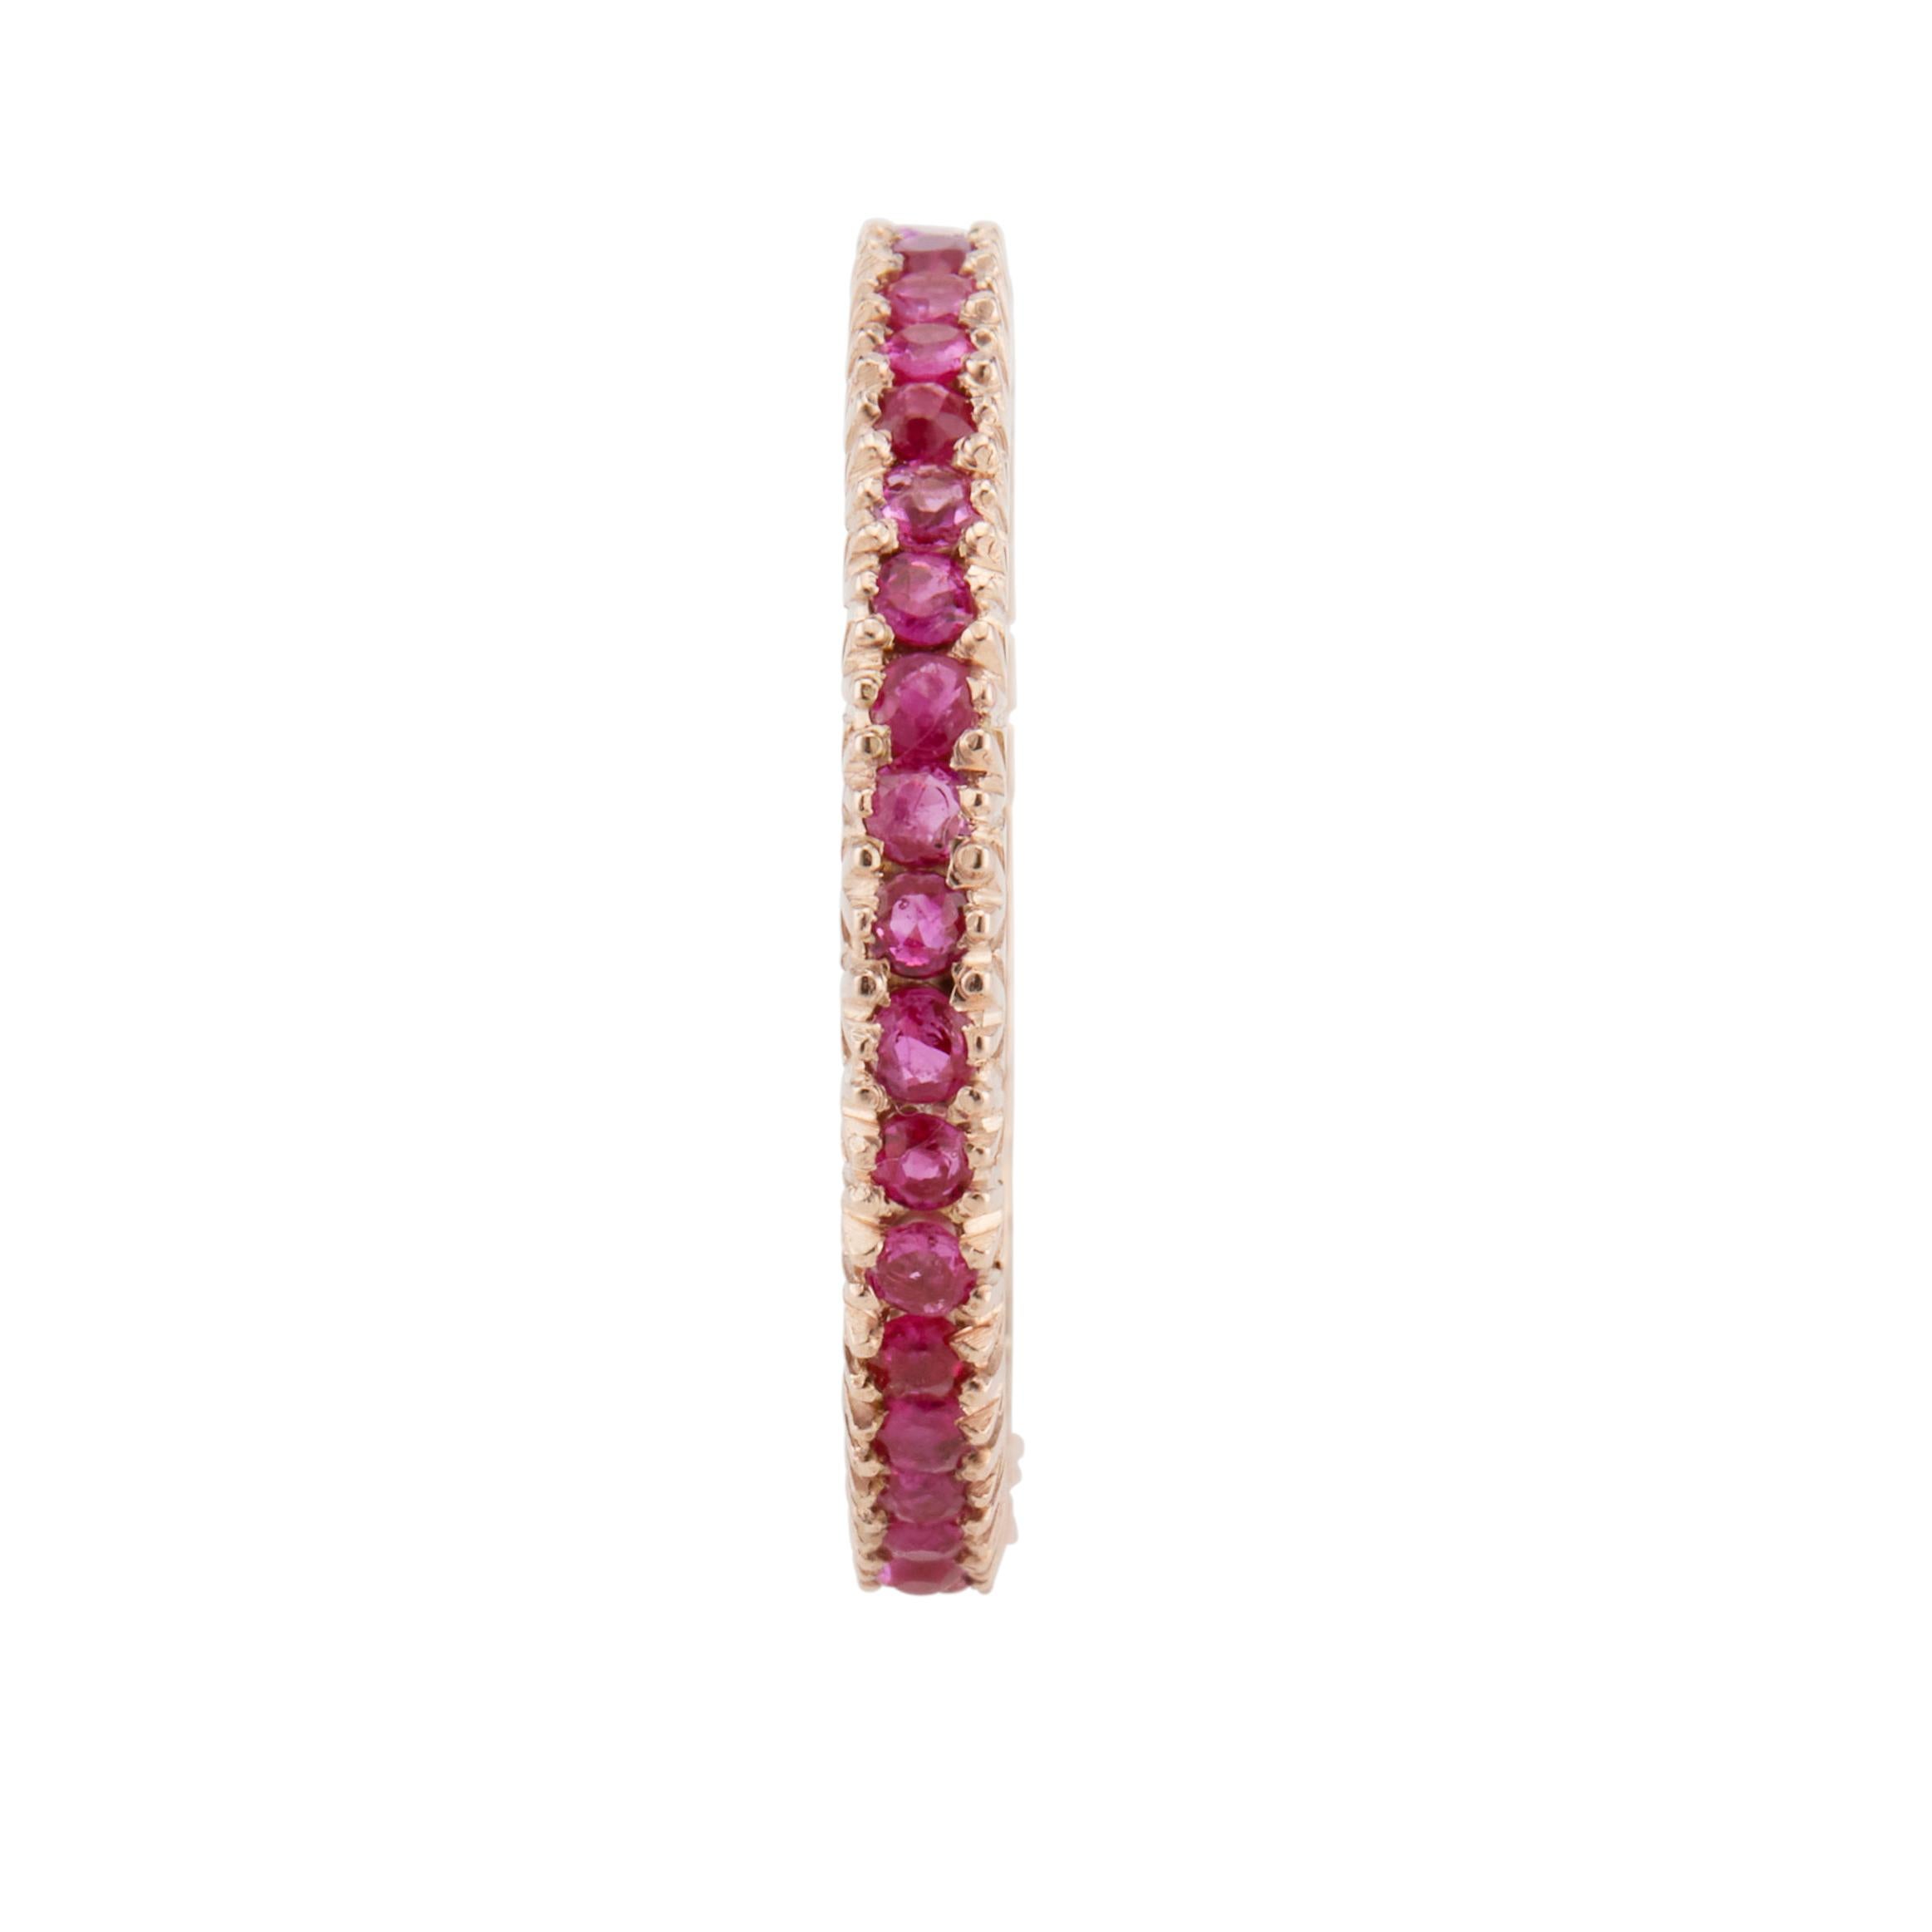 Round Cut 1.10 Carat Ruby Rose Gold Eternity Band Ring